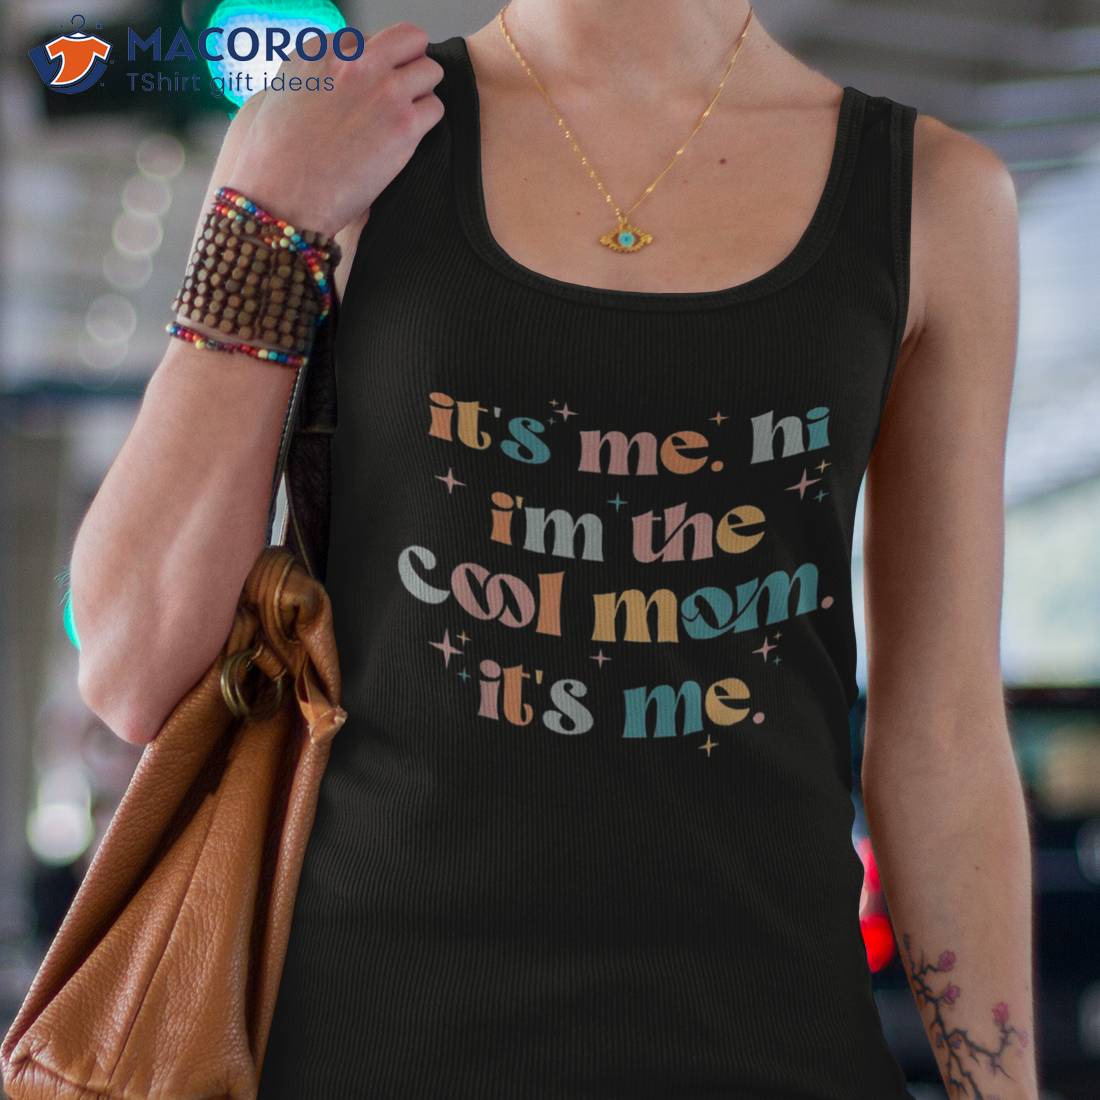 https://images.macoroo.com/wp-content/uploads/2023/04/its-me-hi-im-the-cool-mom-mothers-day-groovy-shirt-tank-top-4.jpg